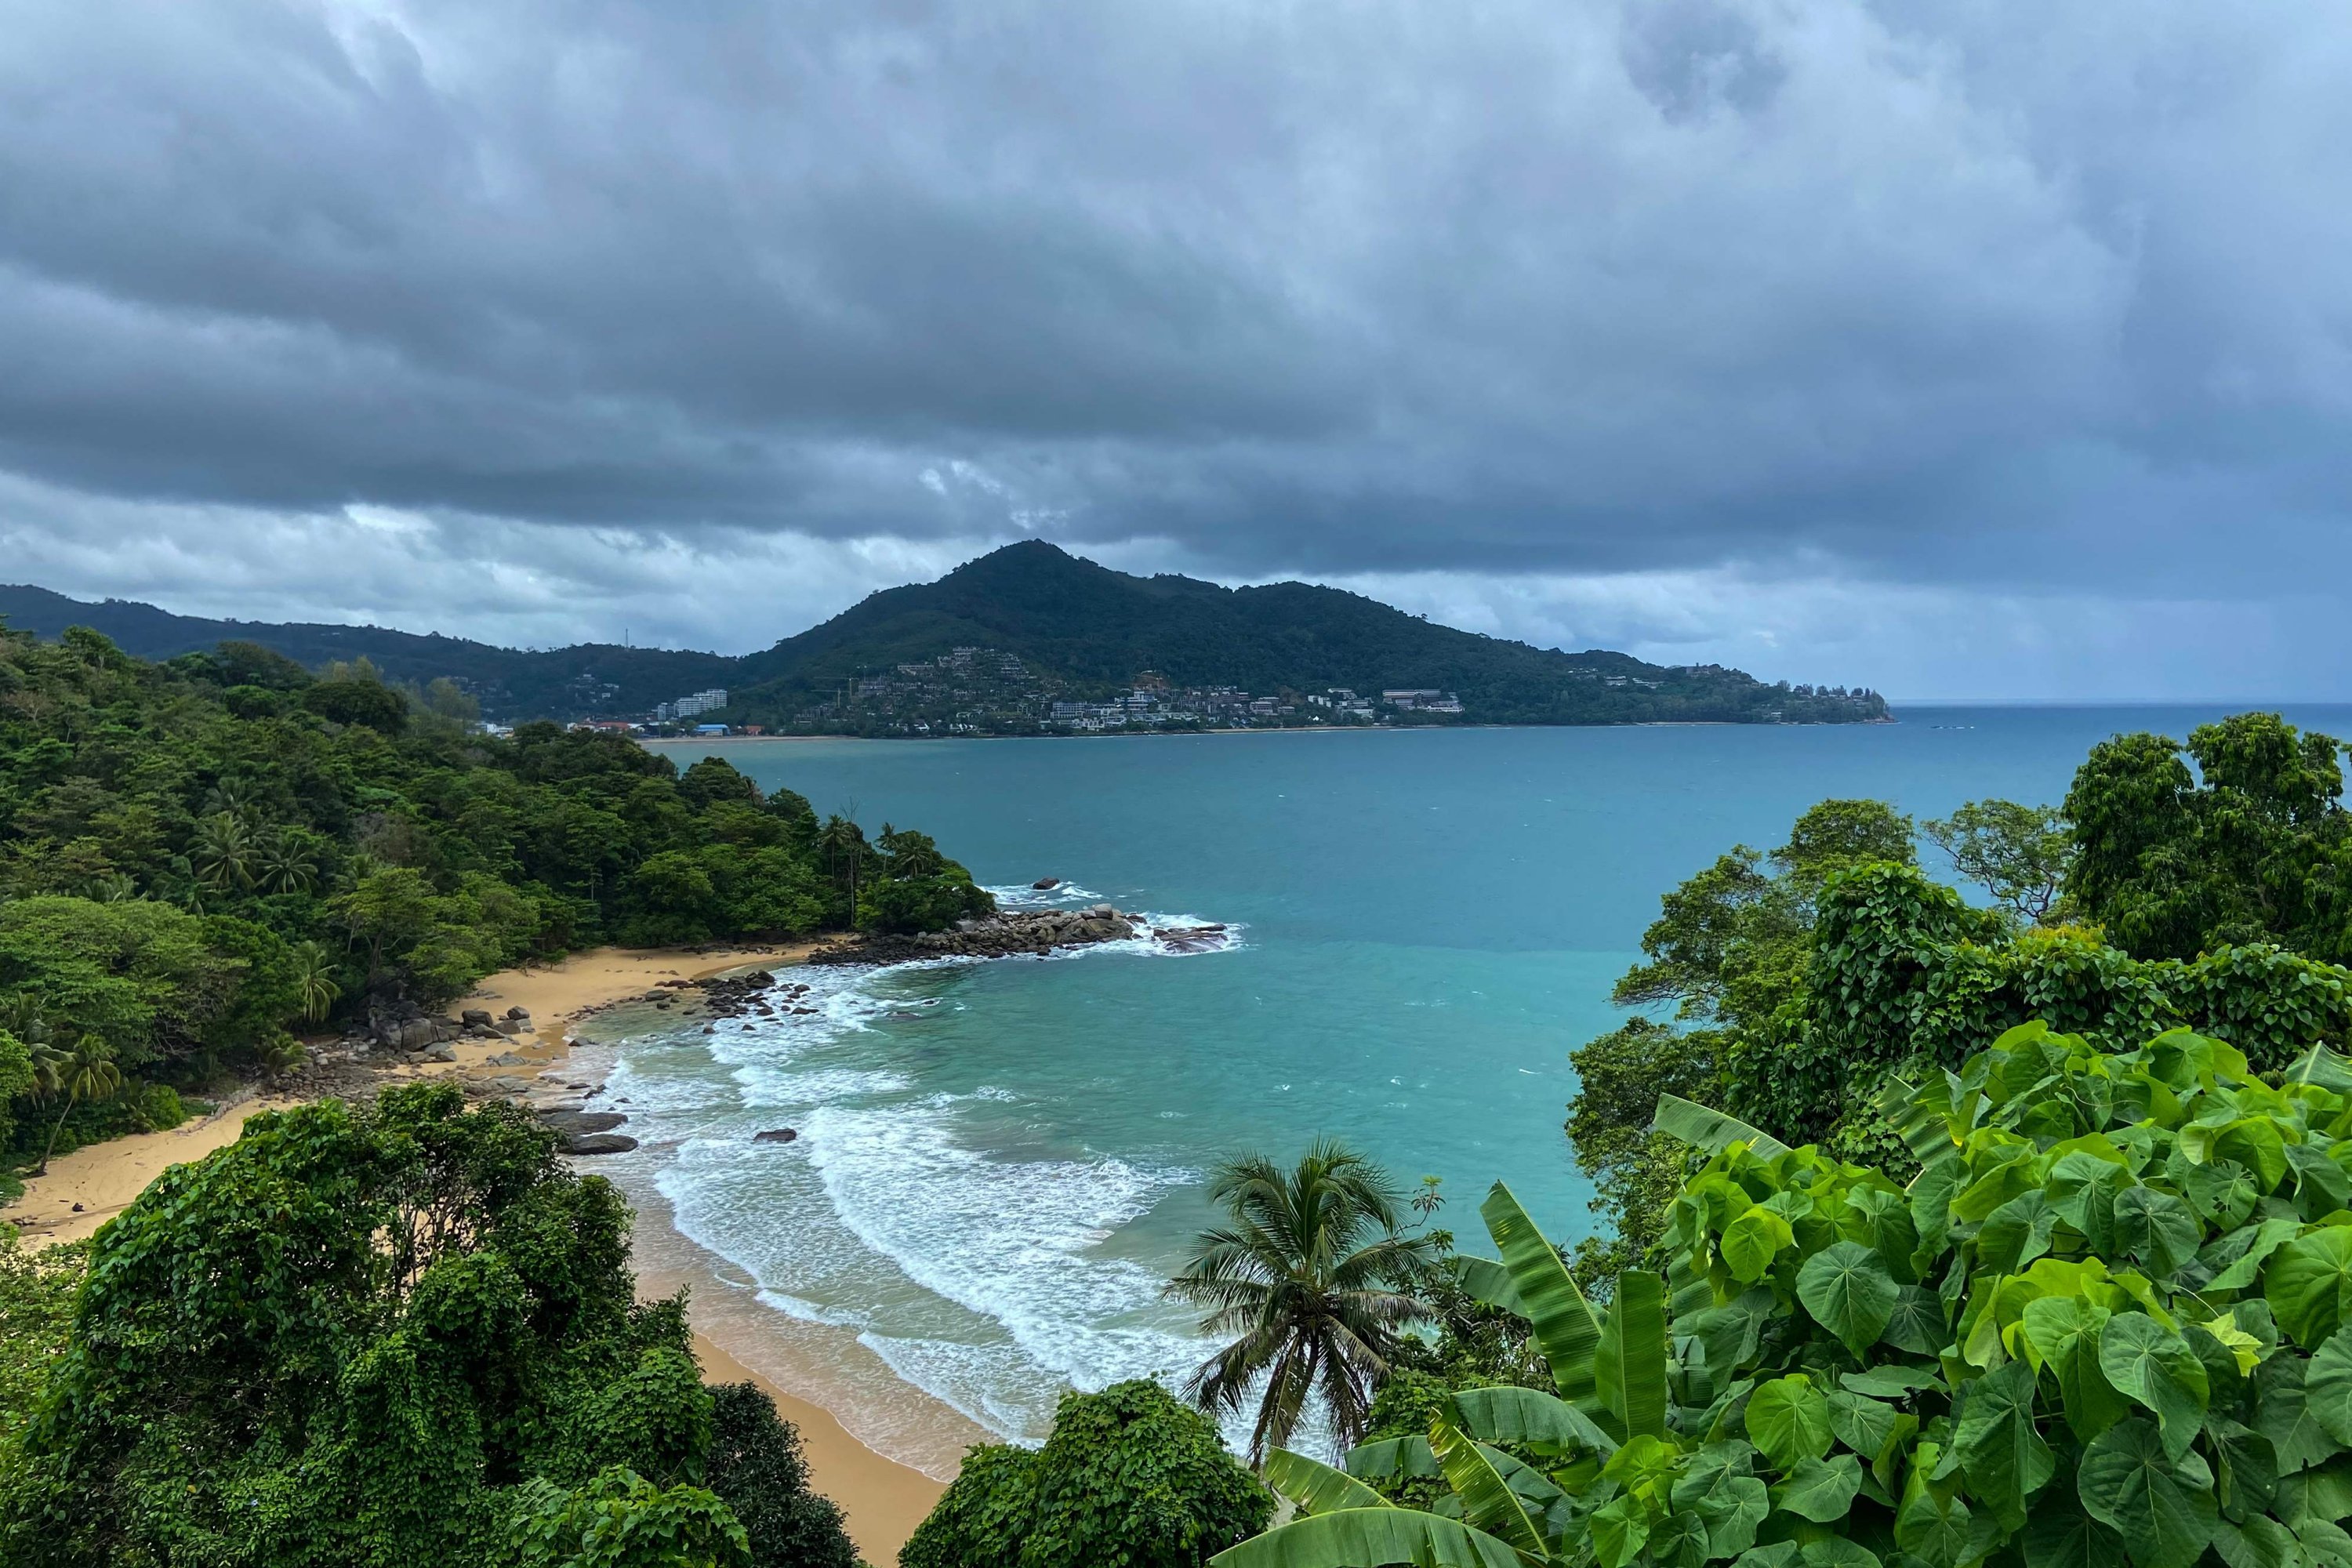 Cape Singh beach as seen from the Laem Sing viewpoint in Phuket, as tourists take advantage of the "Phuket Sandbox" program for visitors fully vaccinated against COVID-19, Thailand, Sep. 21, 2021. (AFP Photo)